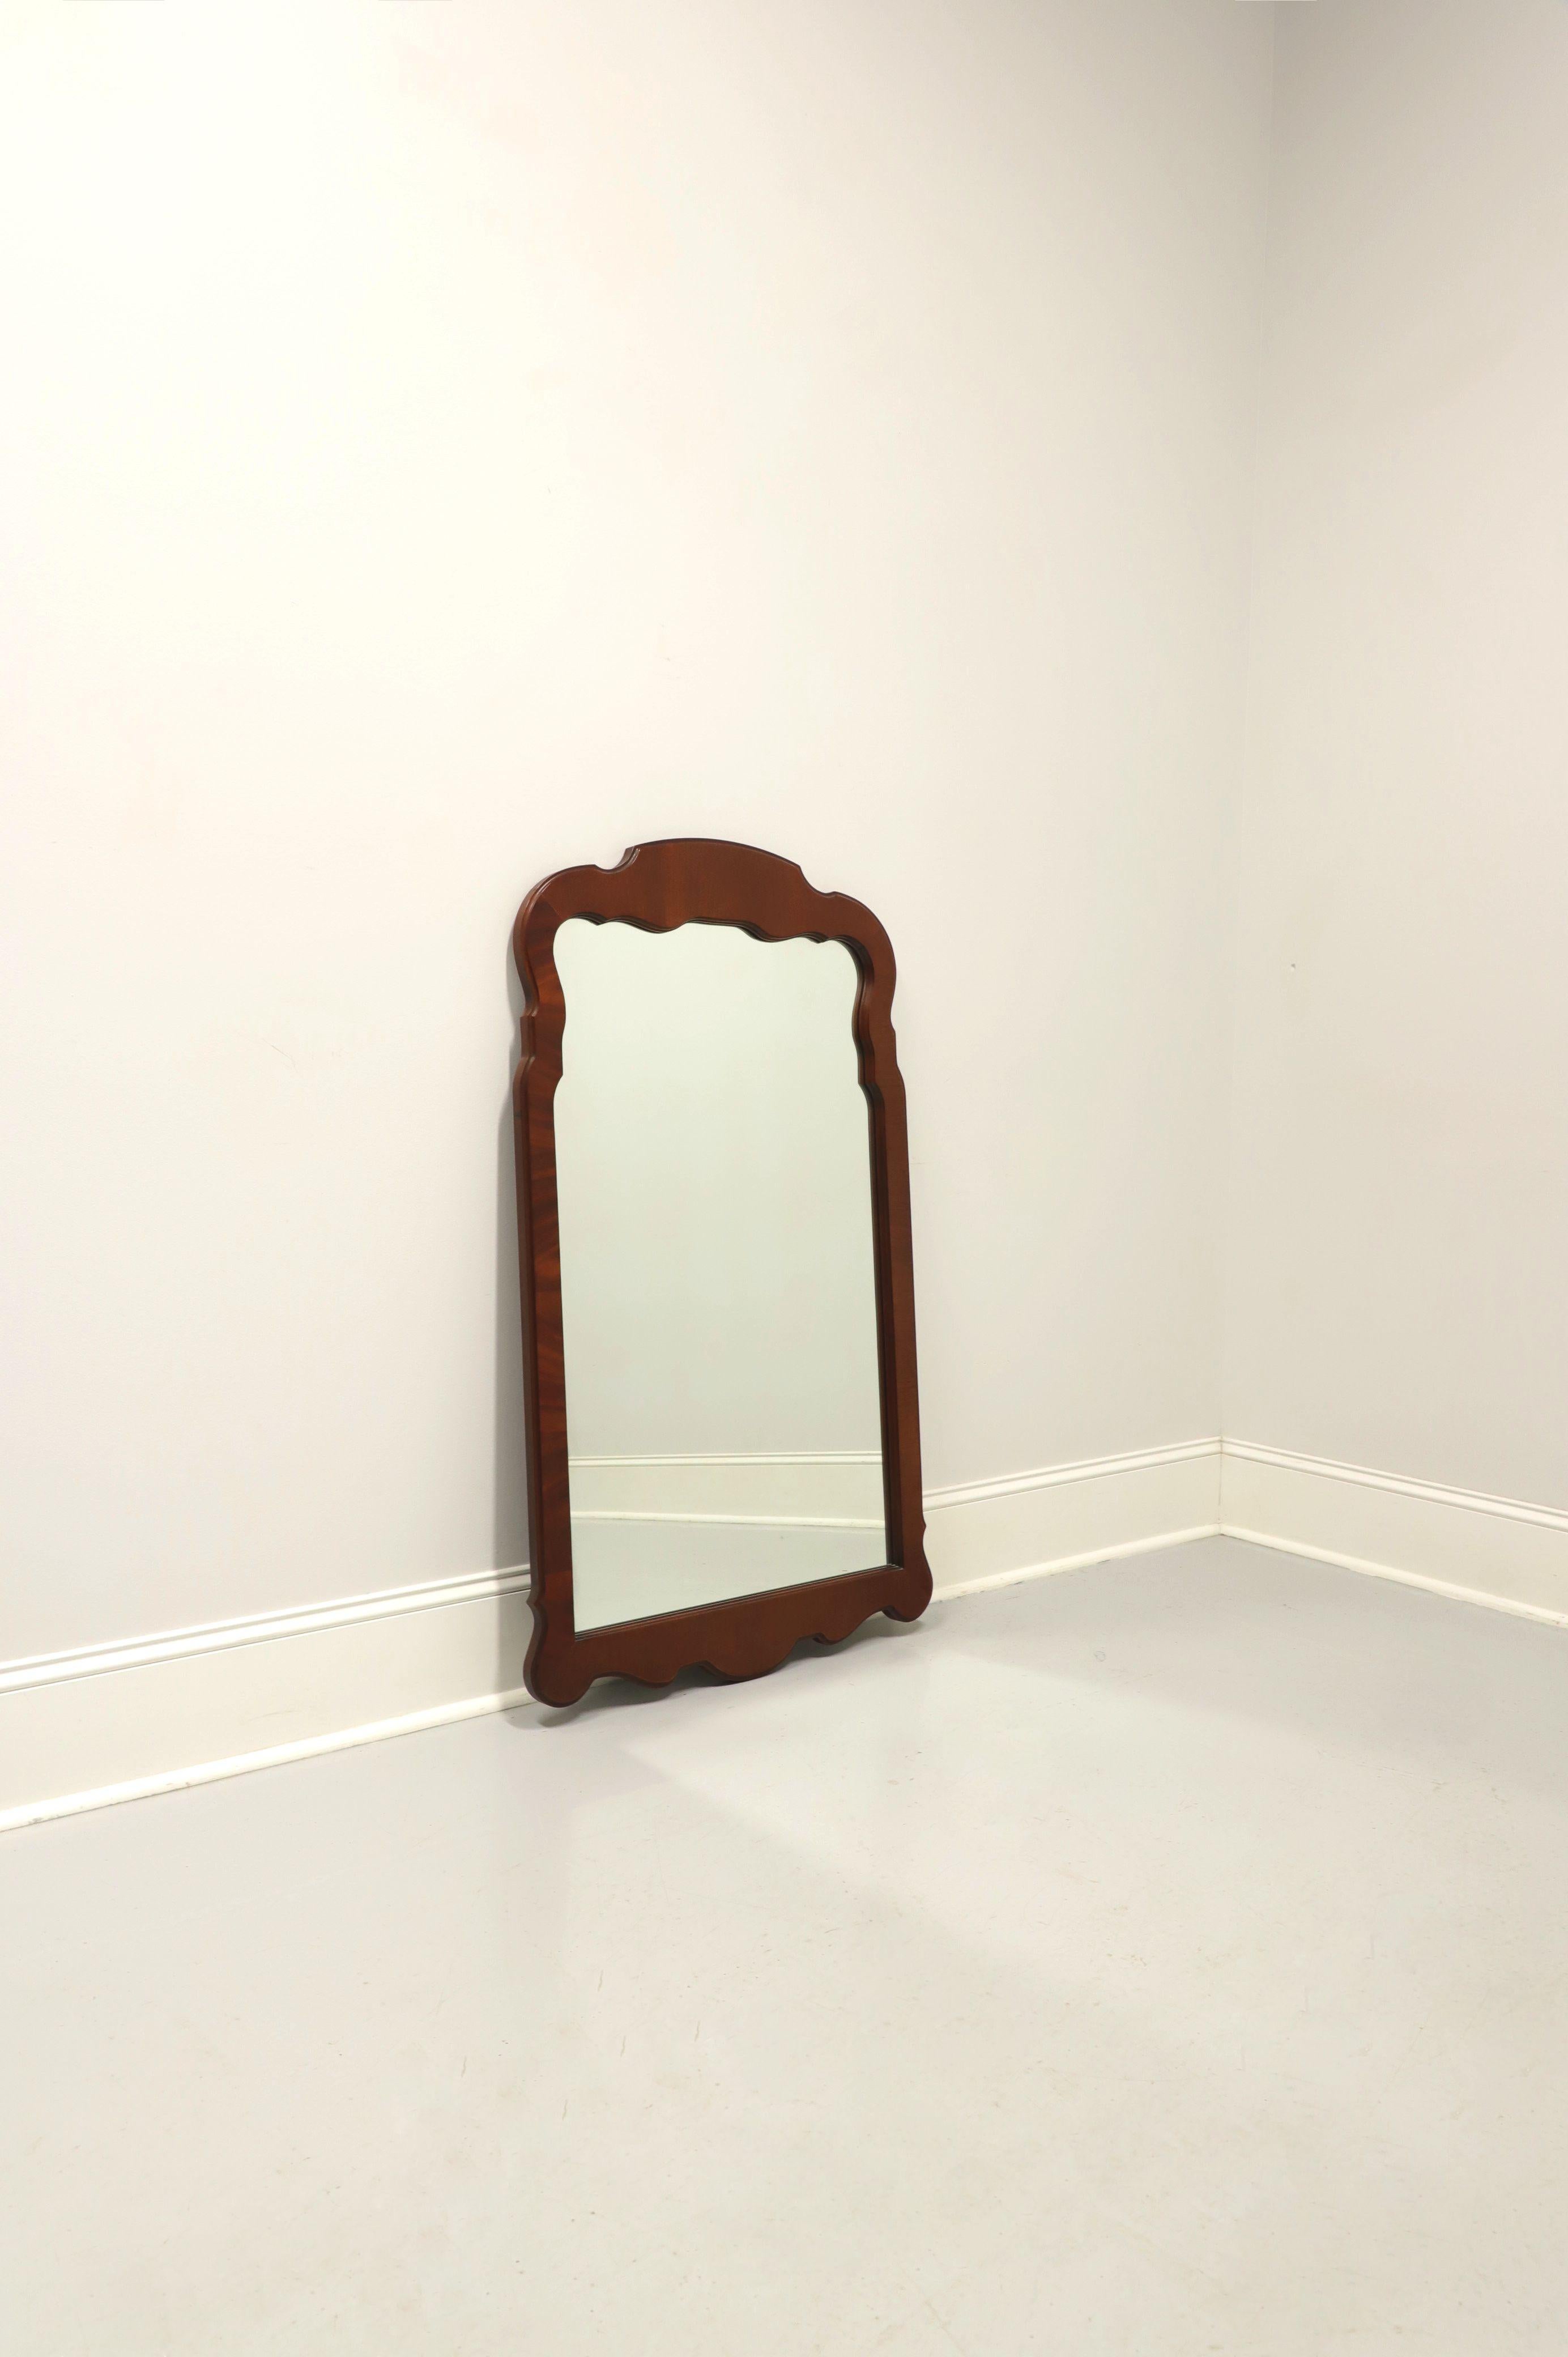 A Chippendale style wall mirror made by Link-Taylor, from their Heirloom Gallery. Mirror glass in a solid mahogany frame with decoratively carved top and bottom. Made in Lexington, North Carolina, USA, circa 1986.

Style #: 910-202

Measures: 28.75